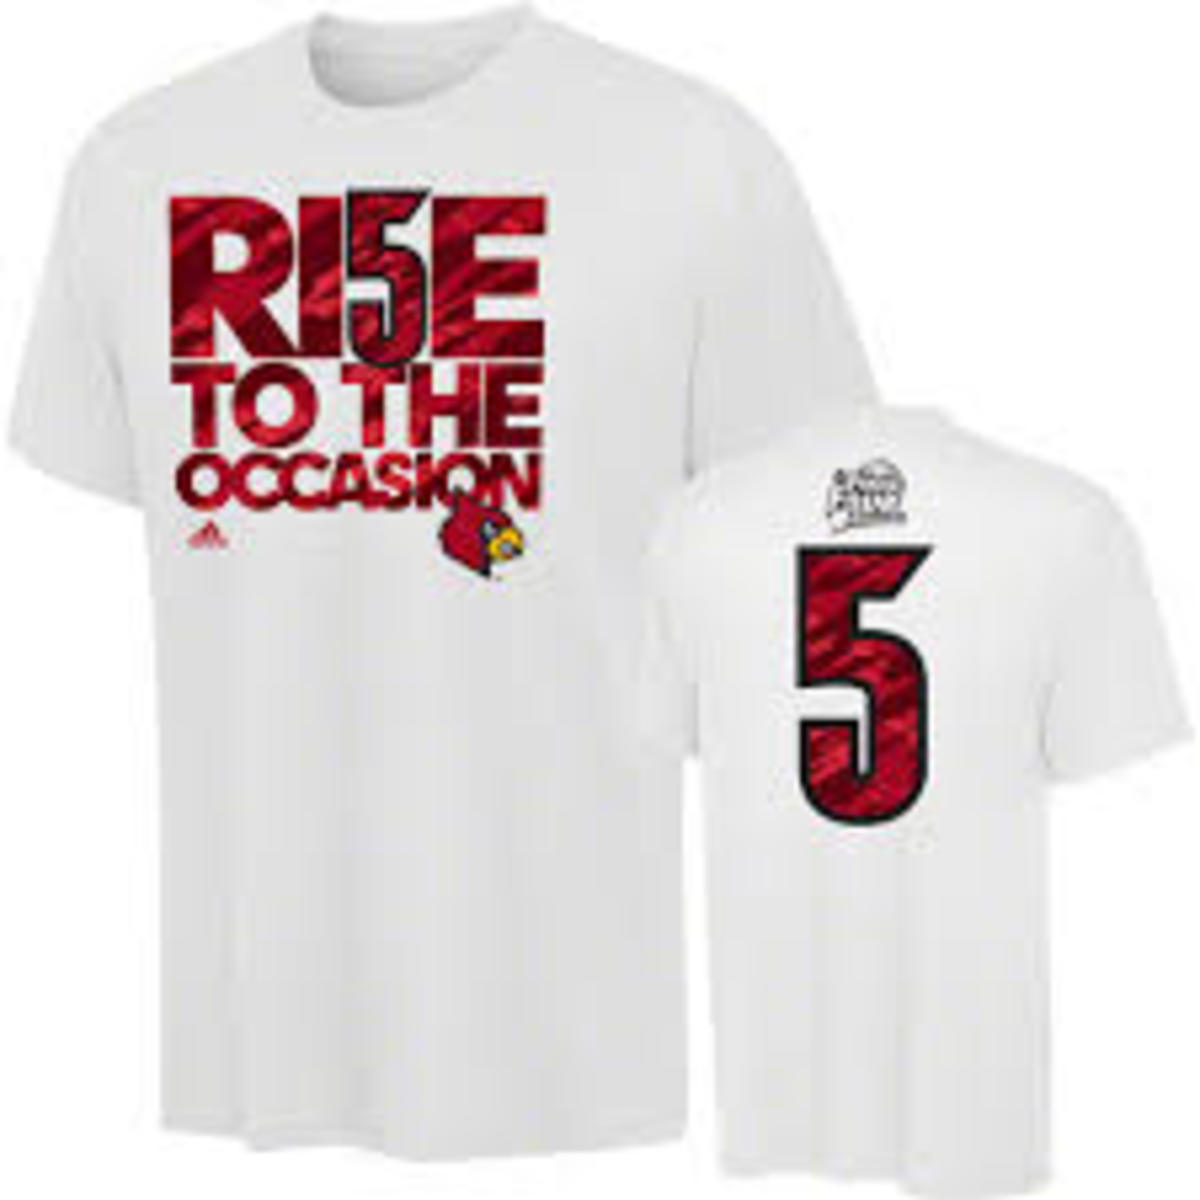 Adidas stopped the sale of the No. 5 shirt inspired by injured Louisville guard Kevin Ware. (Images provided by Louisville website.)